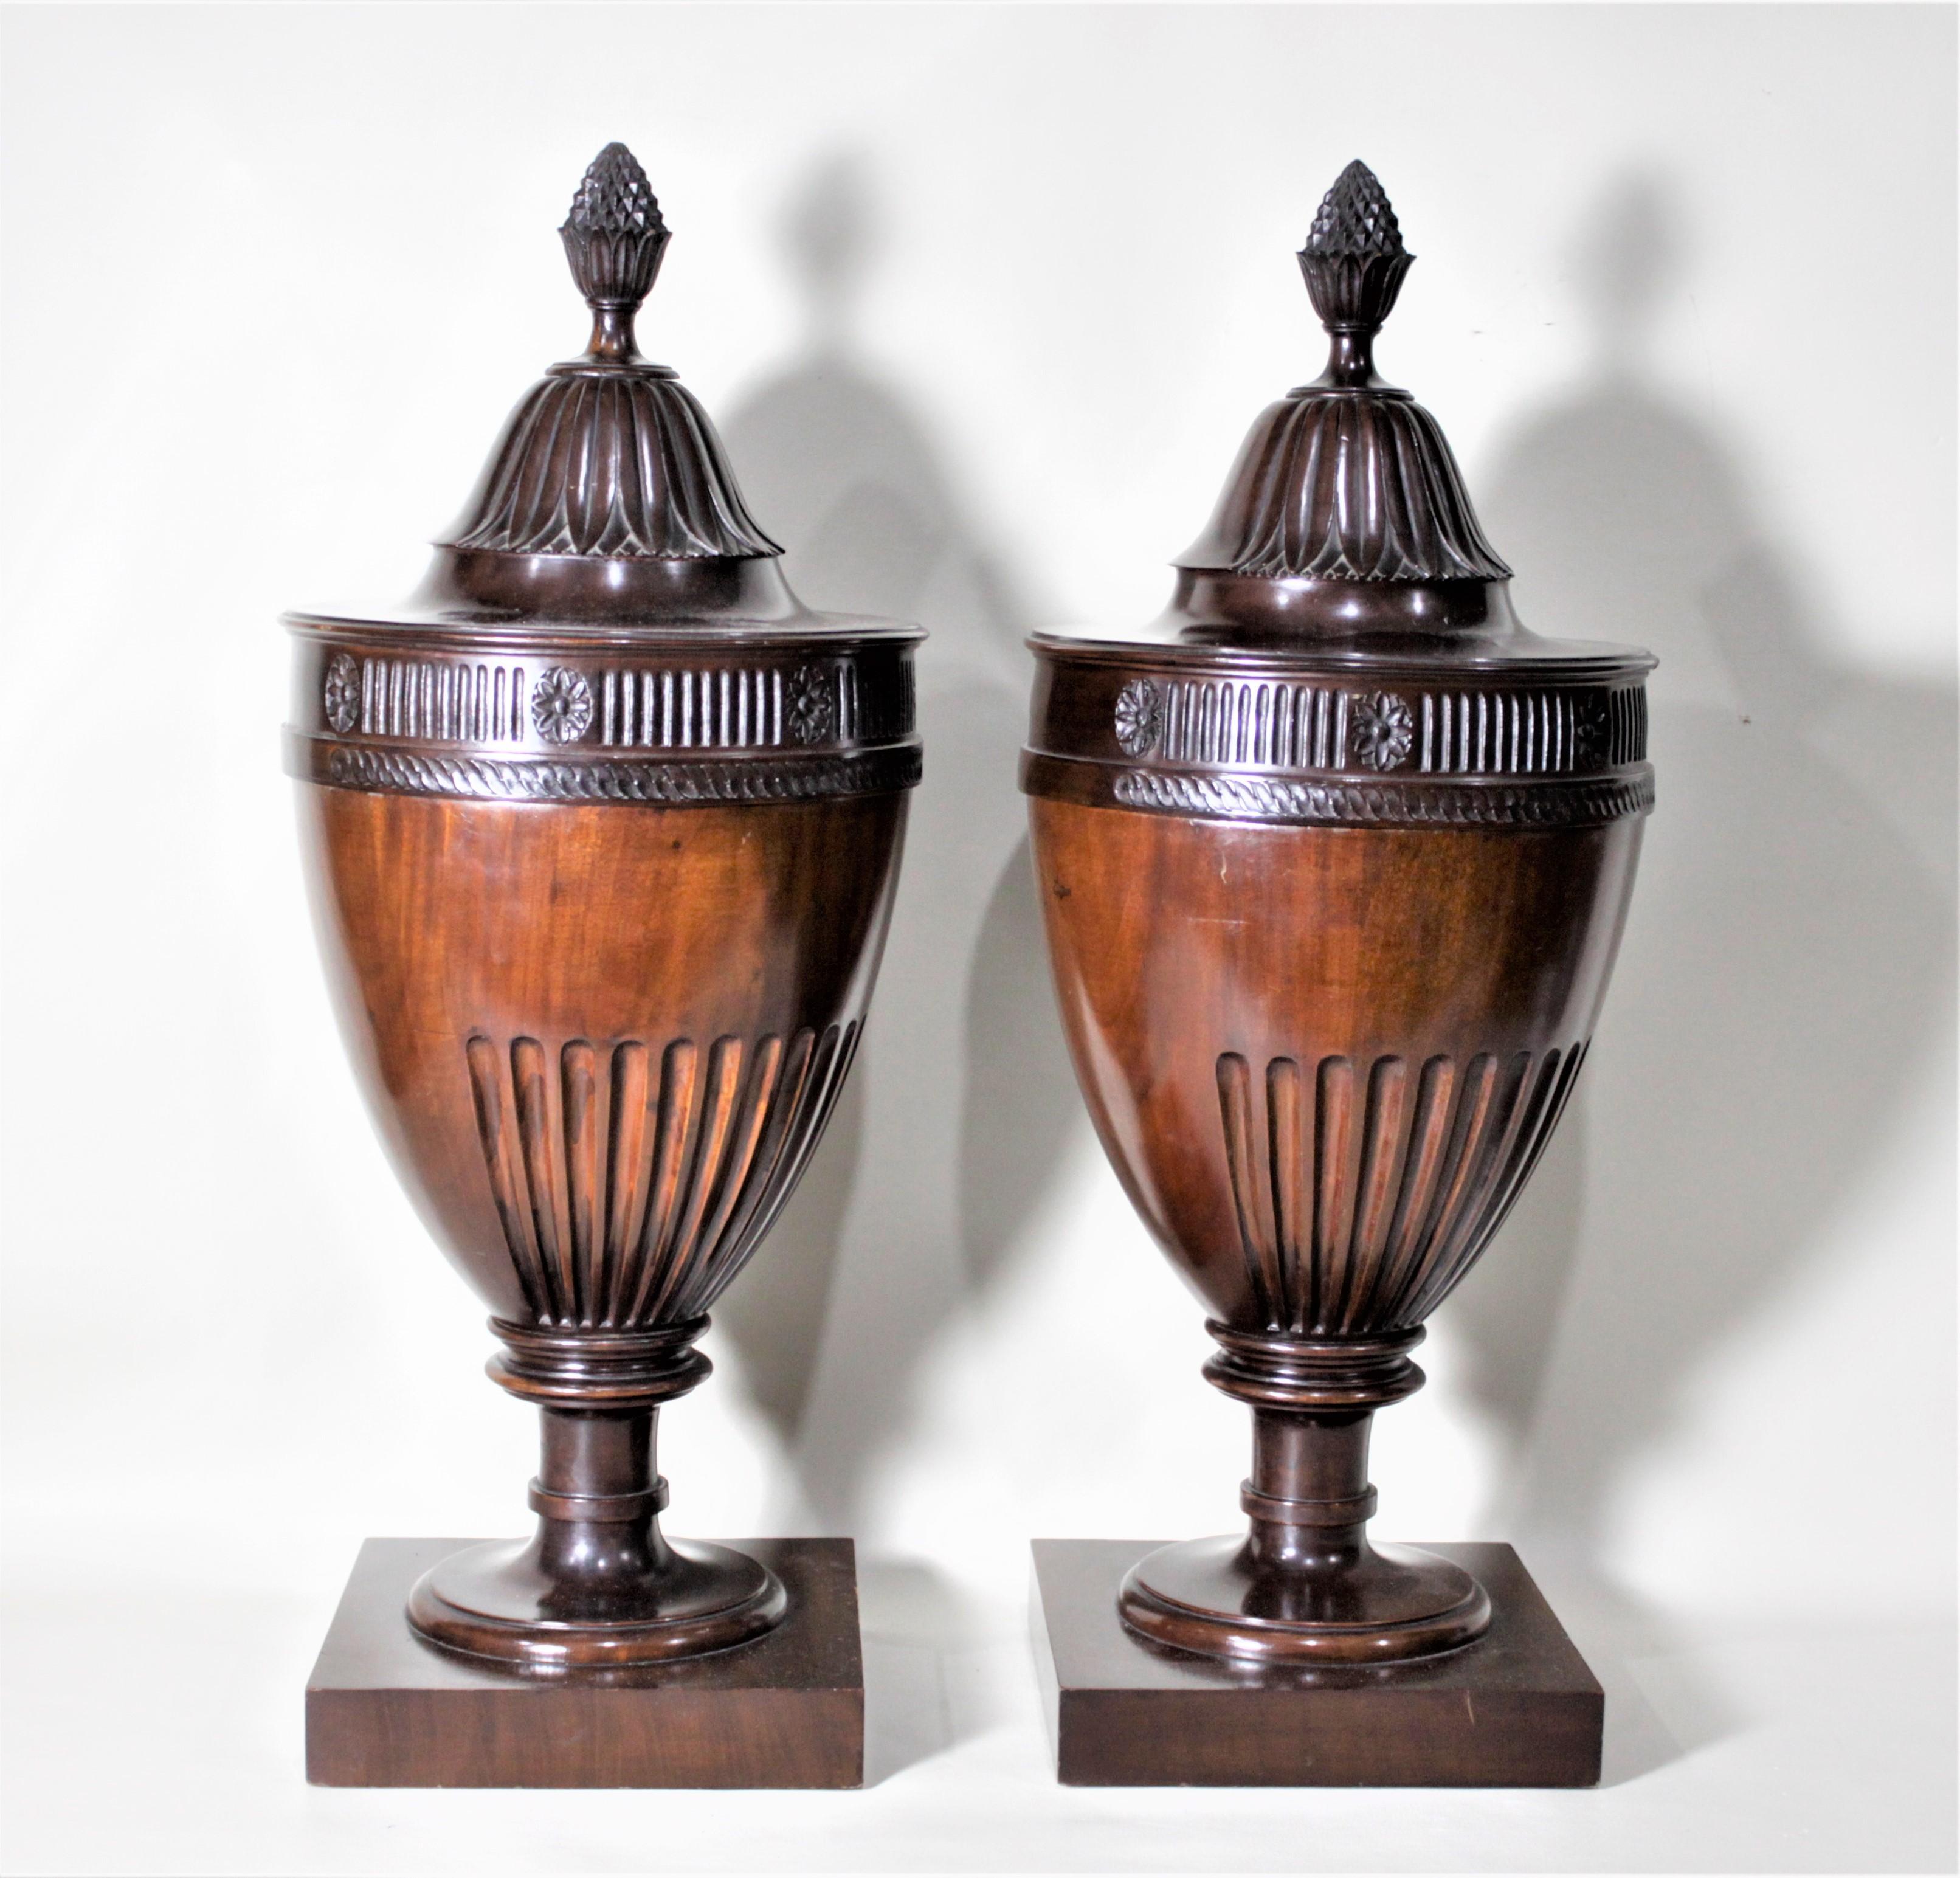 English Pair of Antique Georgian Style Mahogany Knife Urns or Boxes with Carved Accents